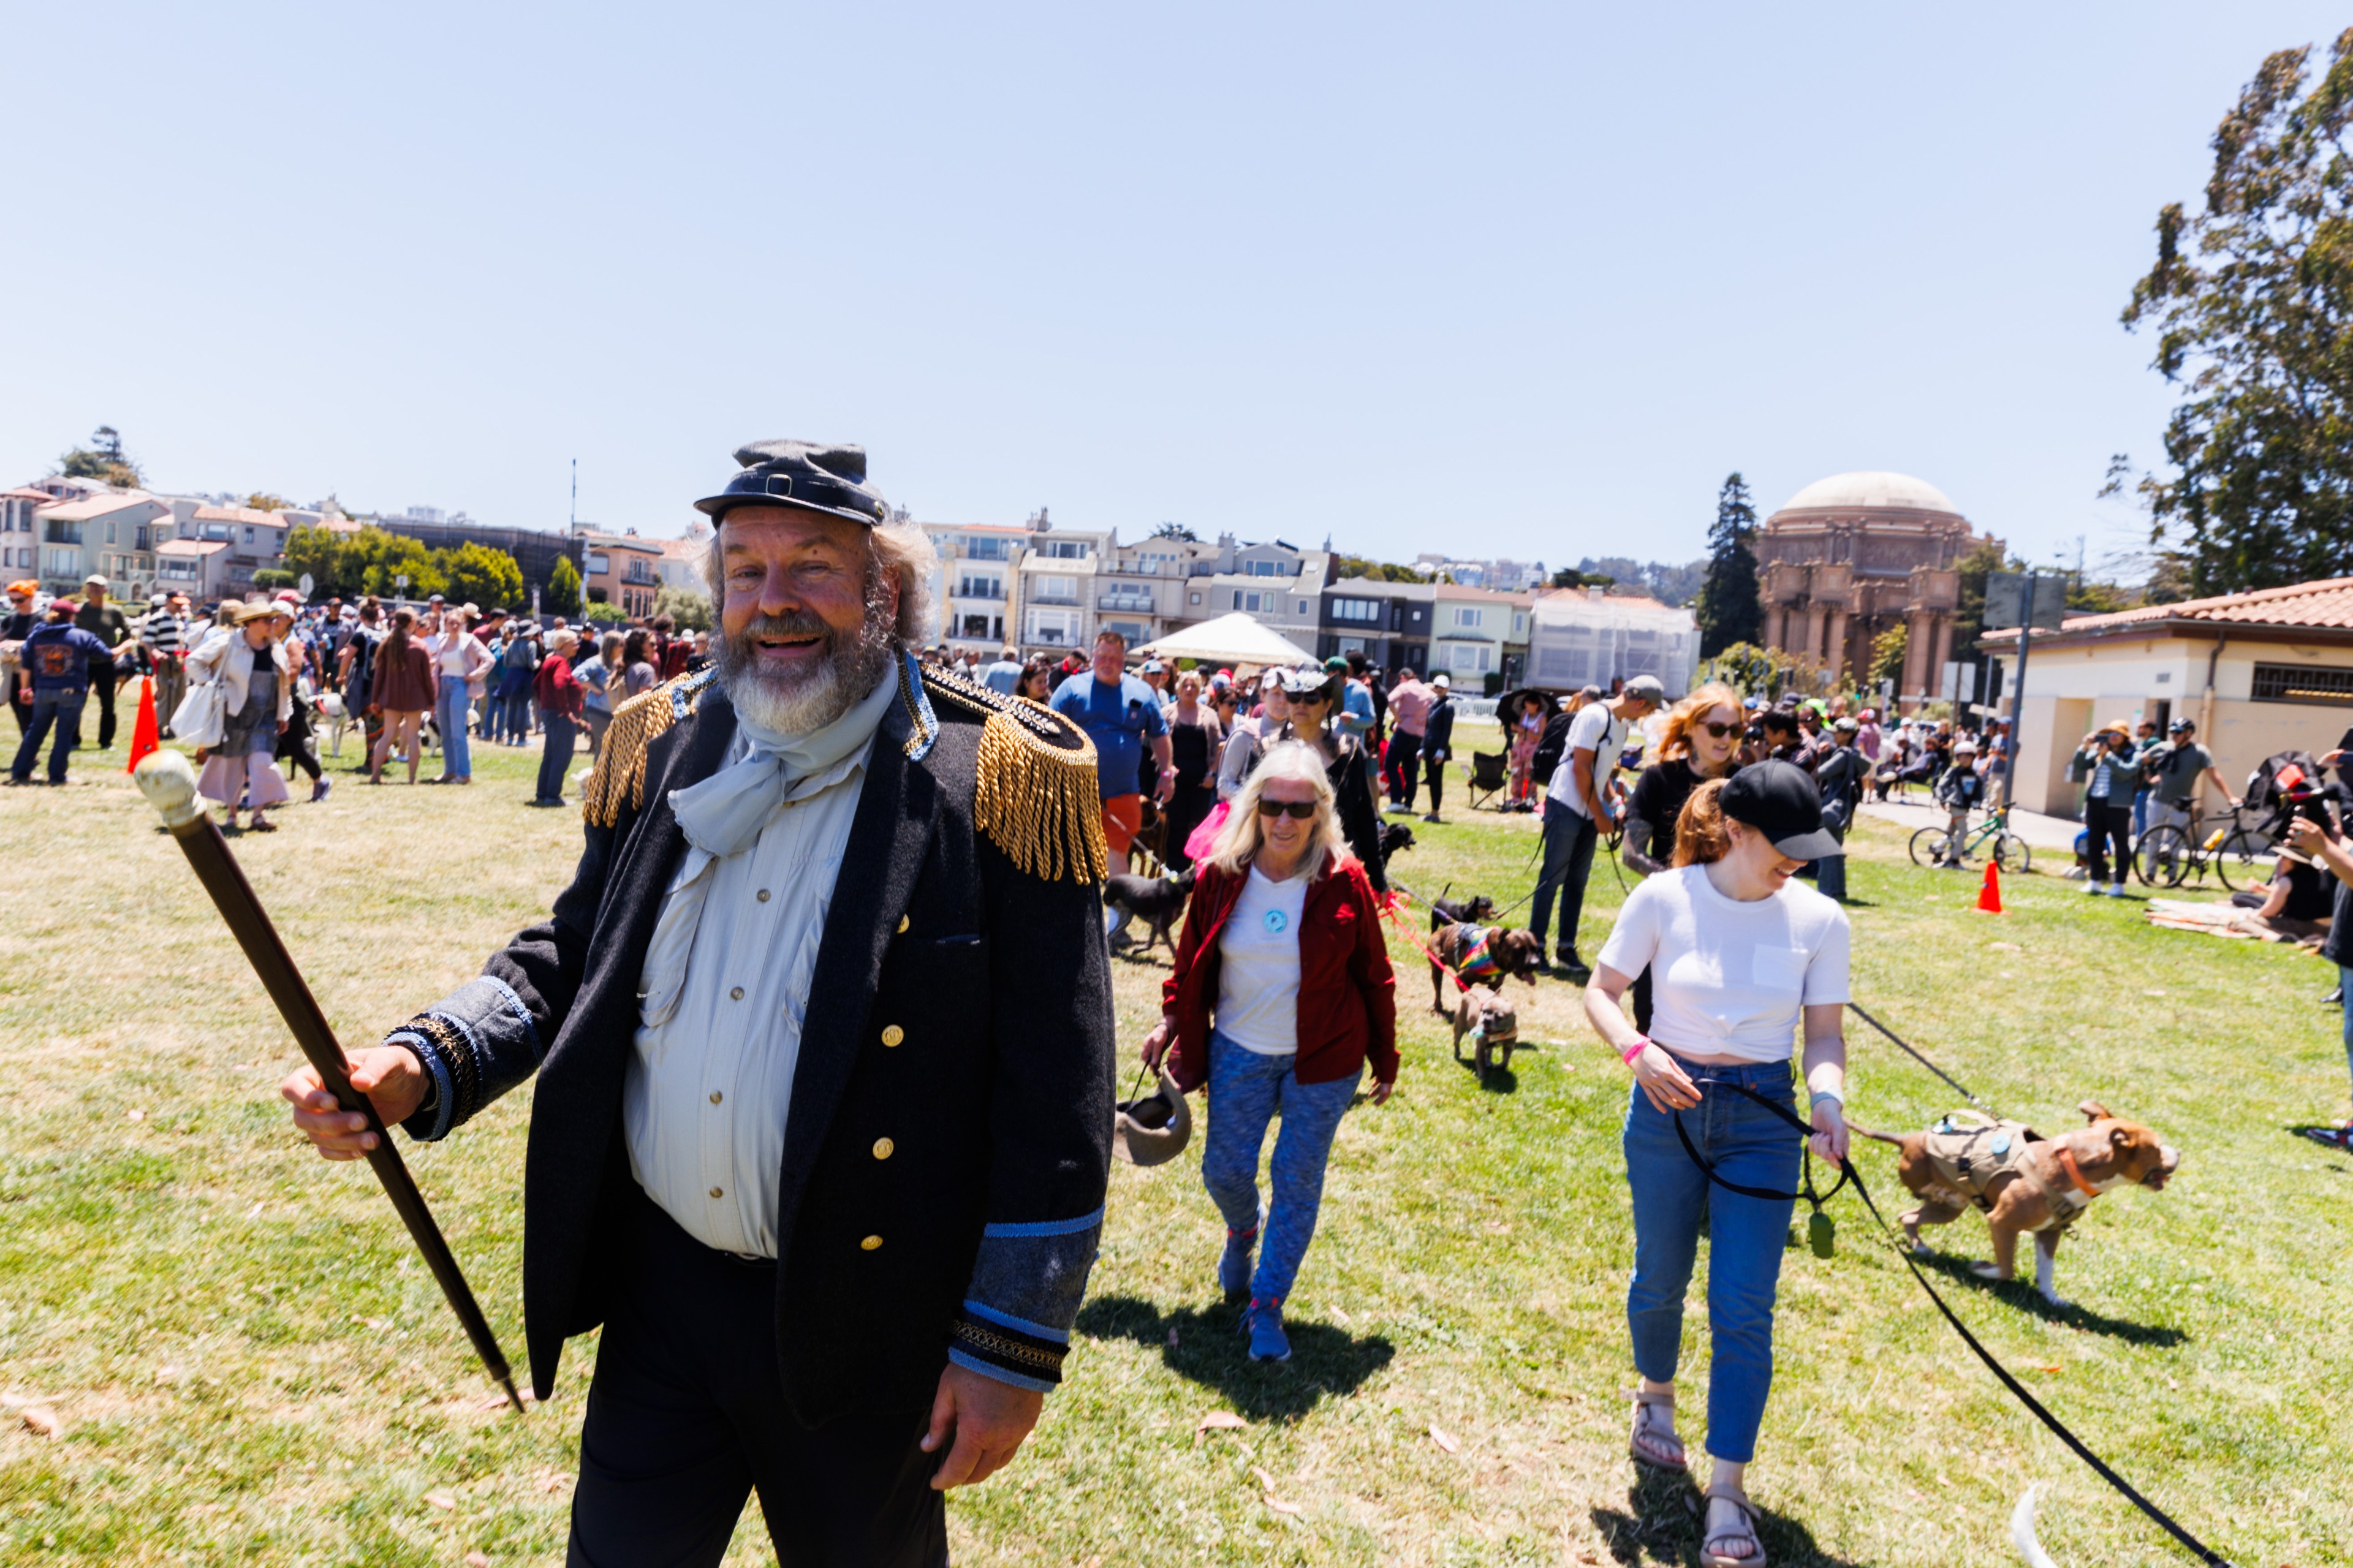 A bearded man in 19th-century attire holding a staff leads a crowd in a park. People walk dogs, and buildings are visible in the background under a clear sky.